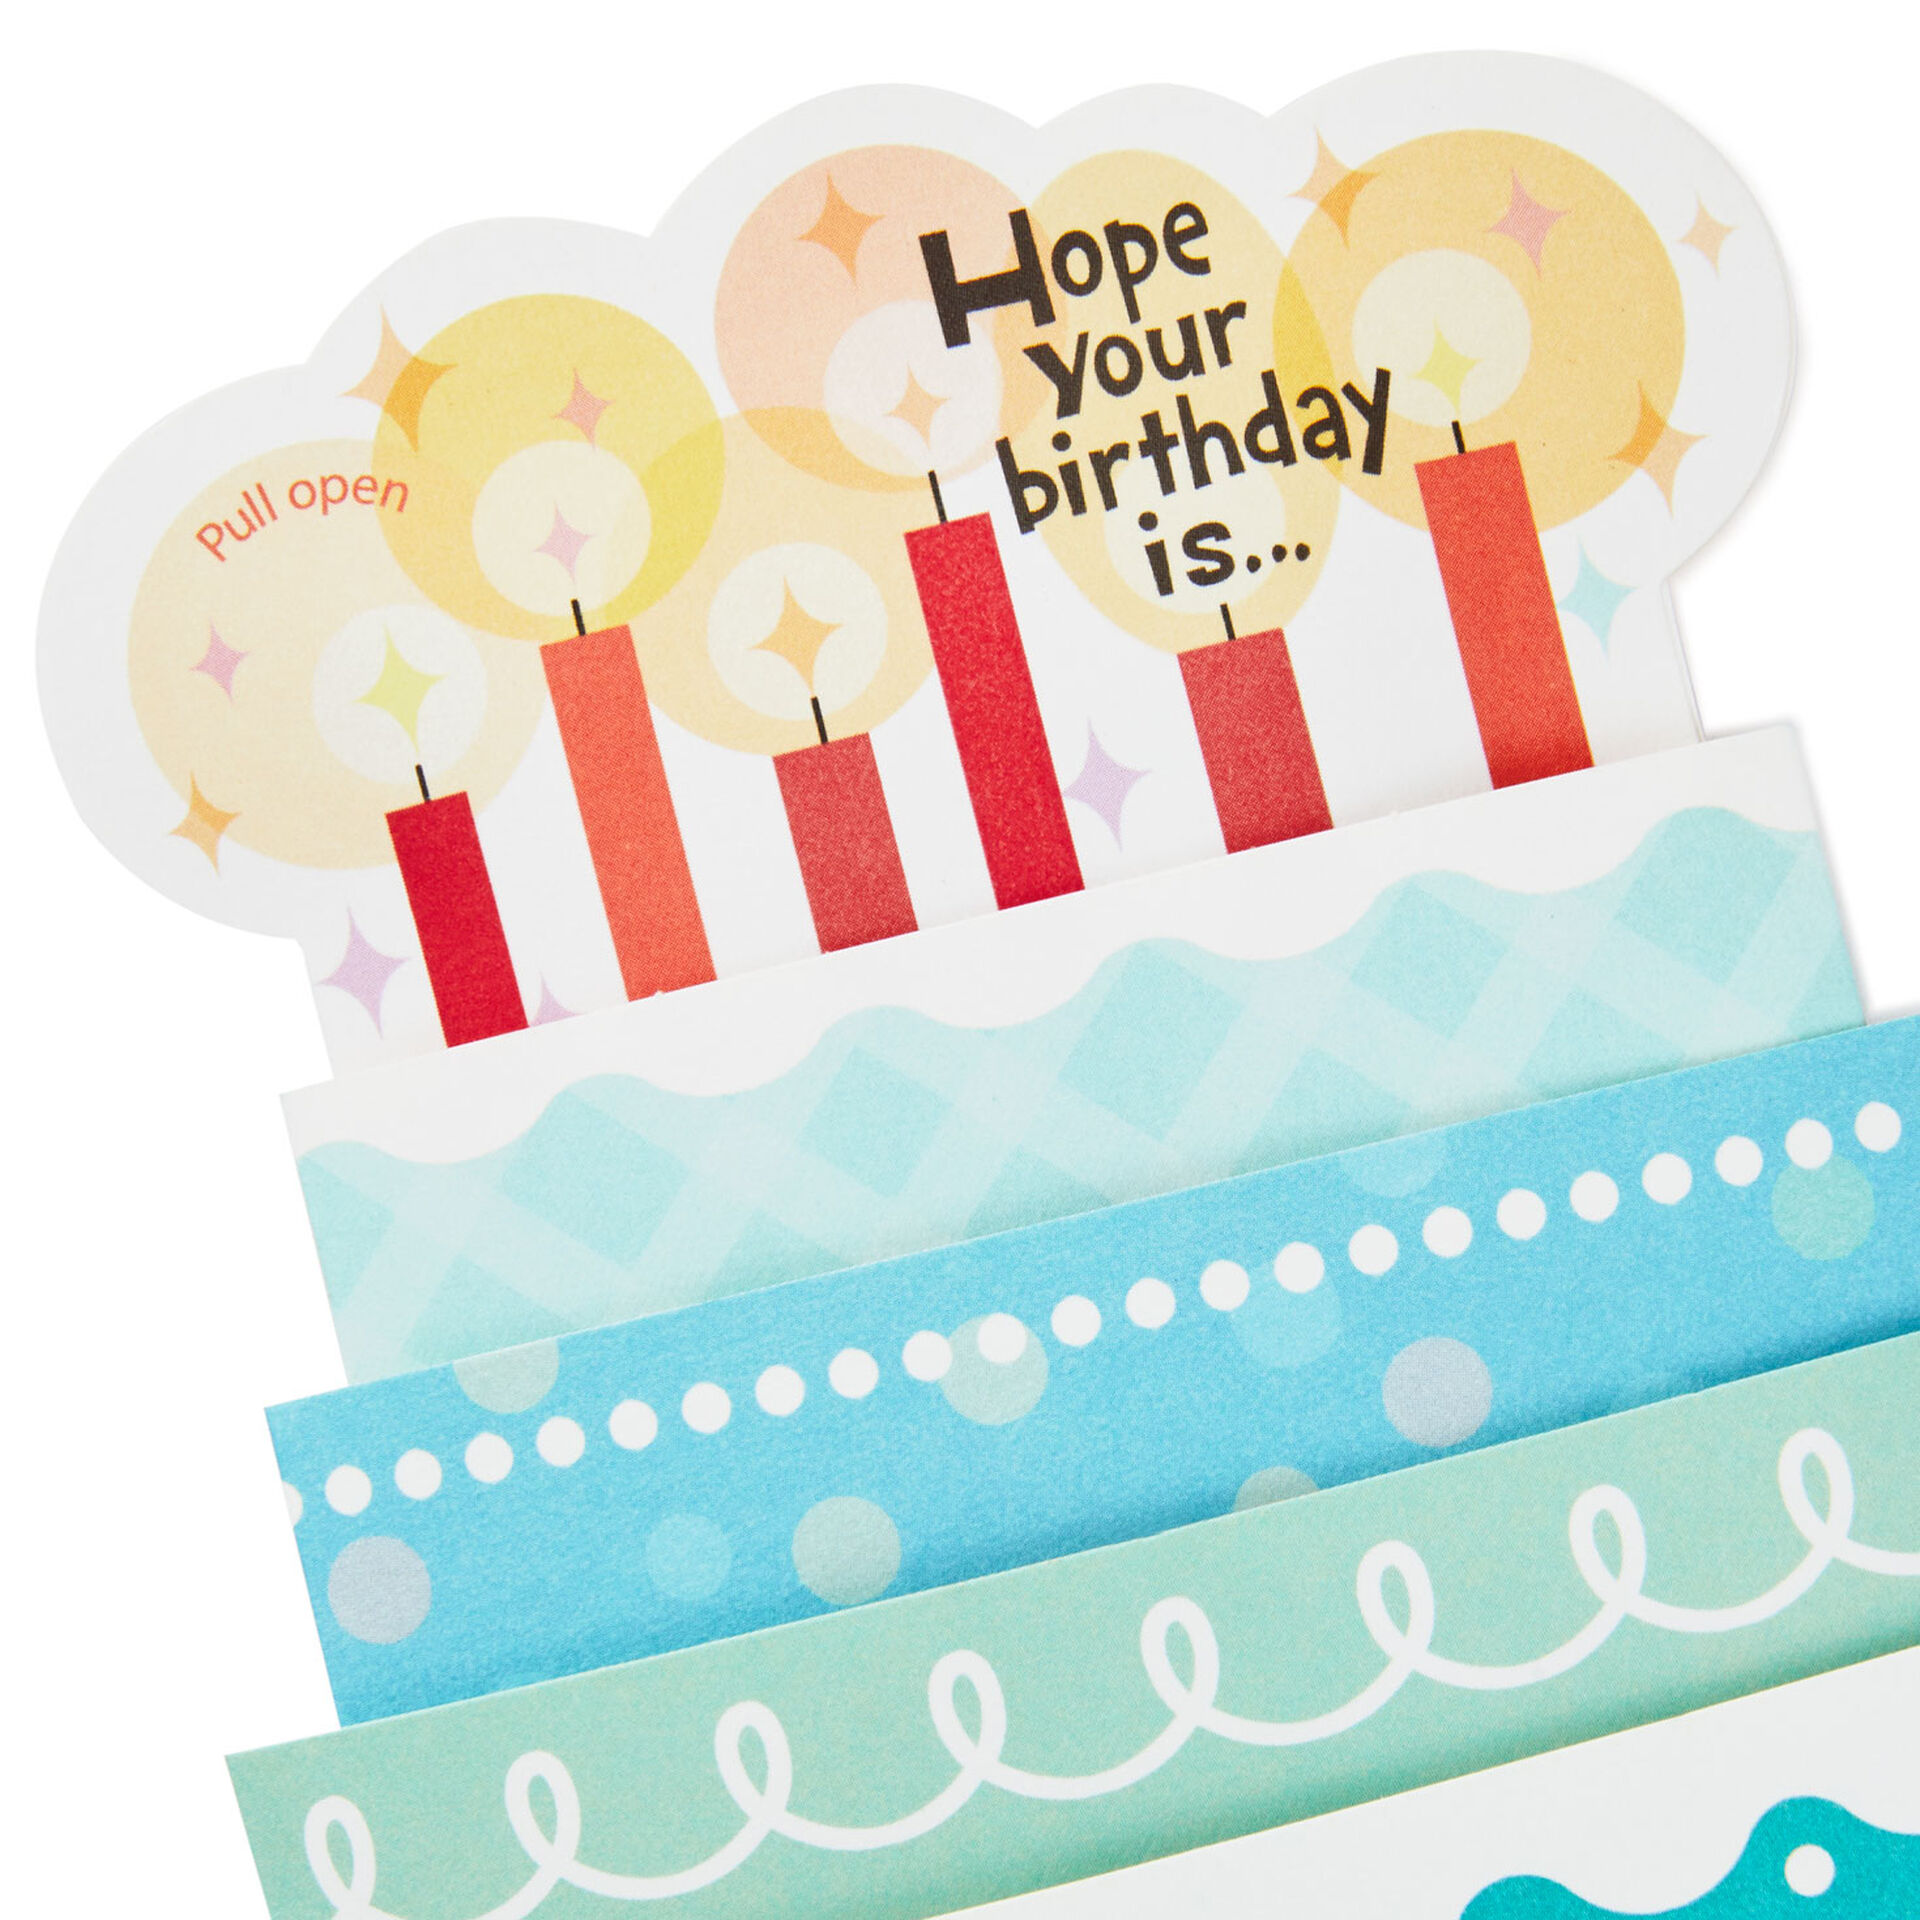 Cake and Candles Telescoping Musical Birthday Card - Greeting Cards ...